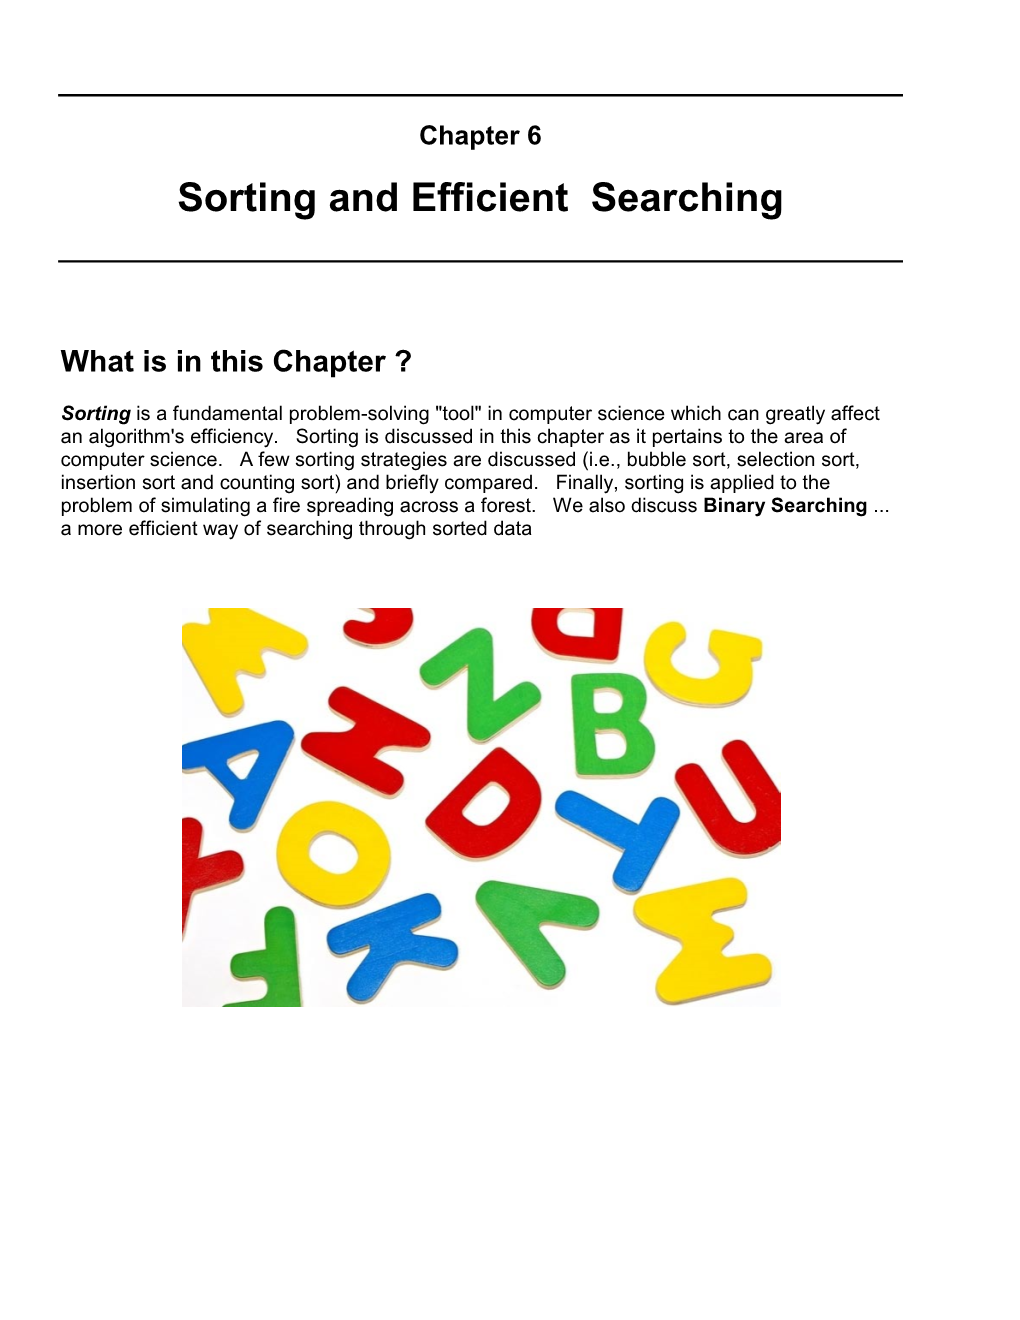 Sorting and Efficient Searching